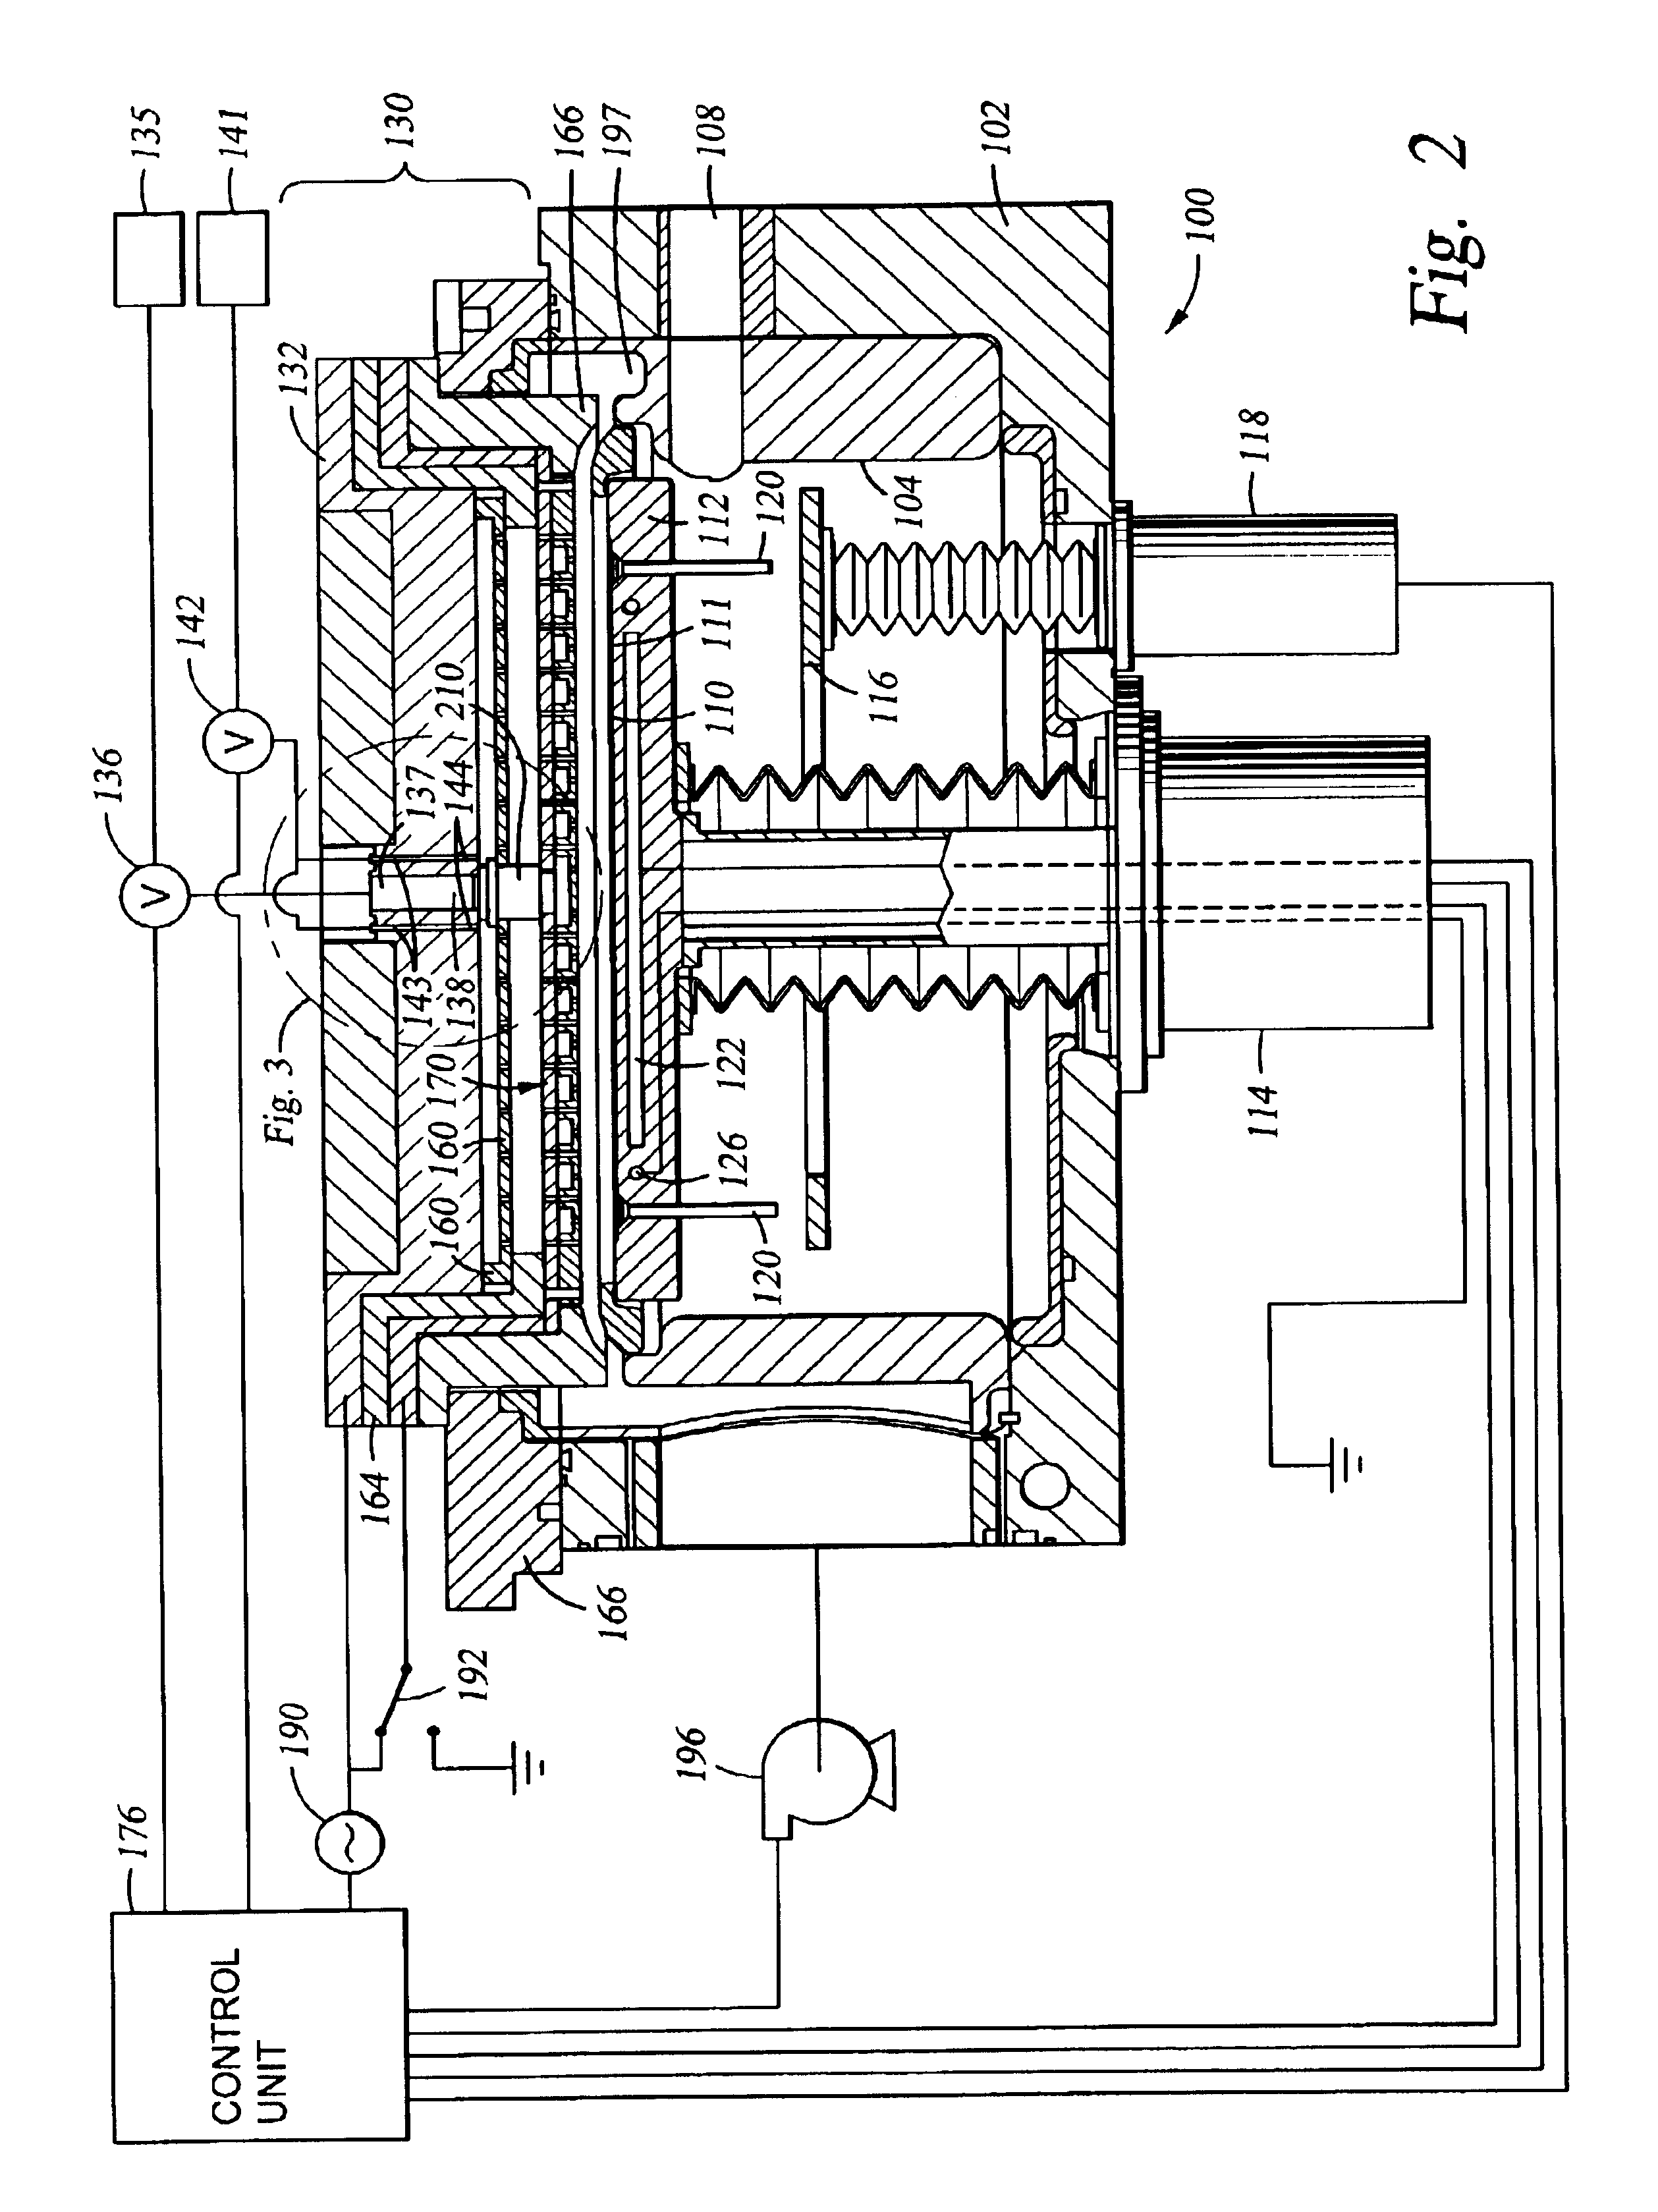 Apparatus and method for plasma assisted deposition